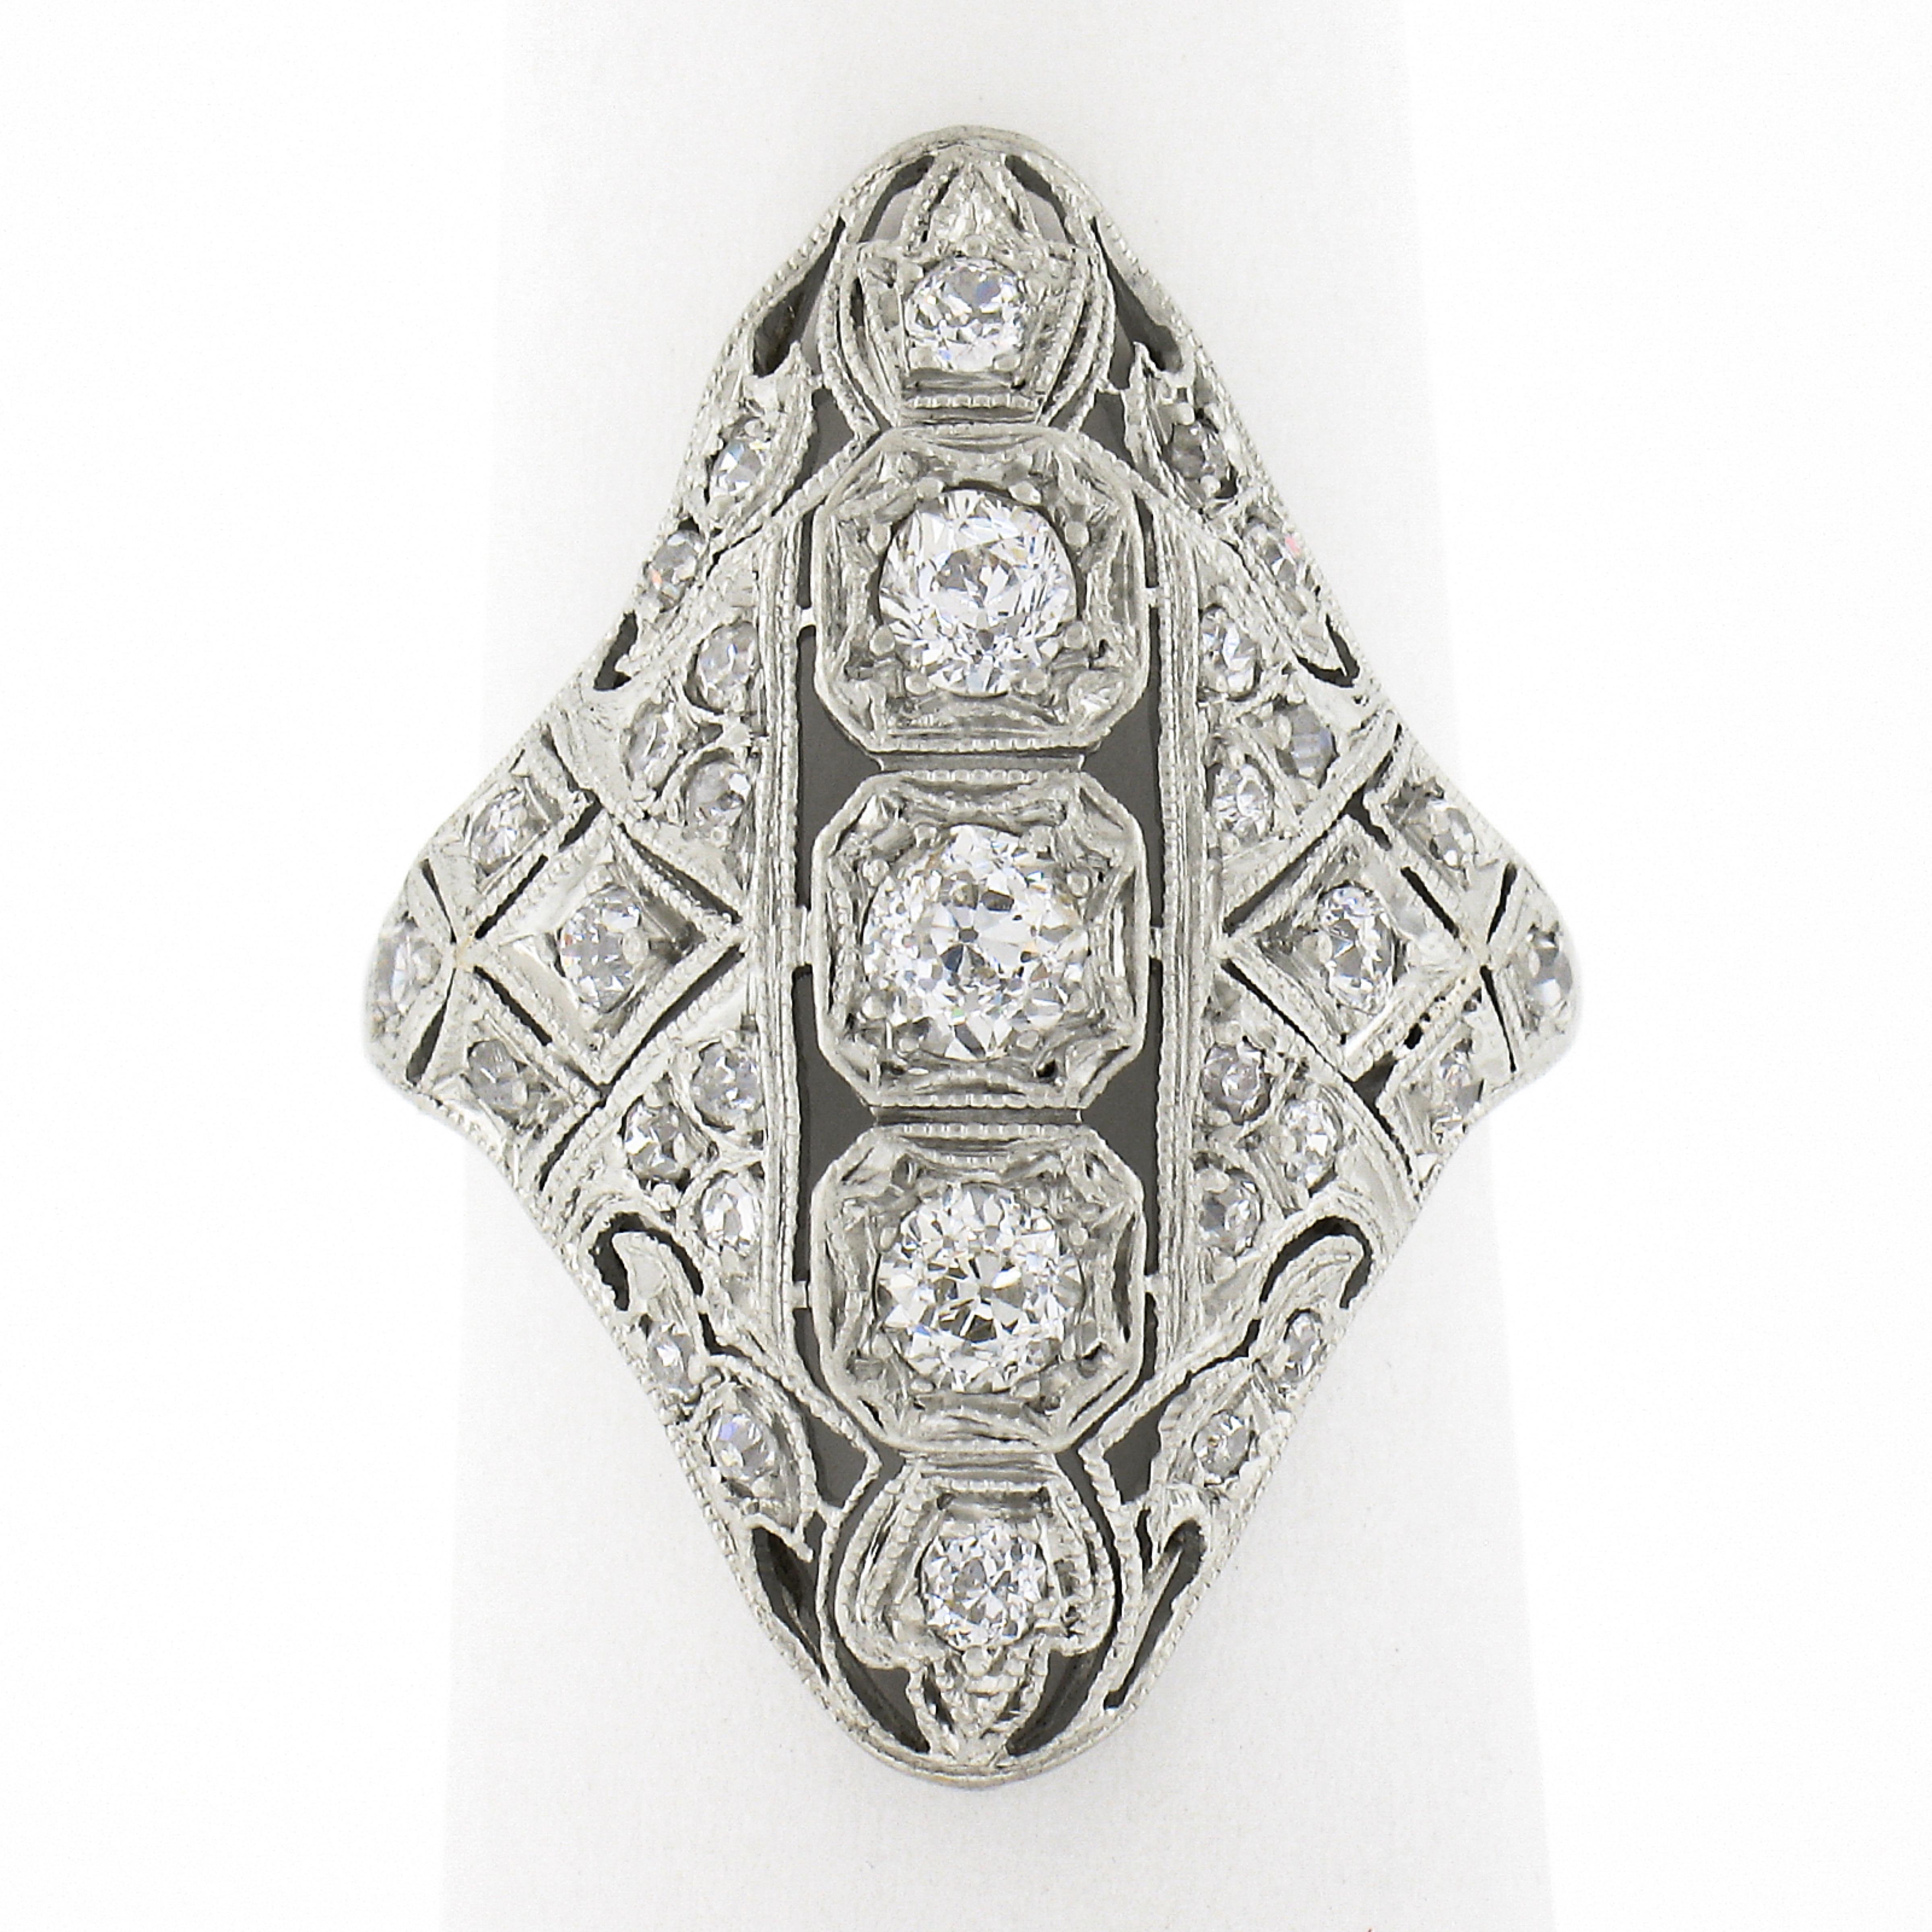 This incredible, all original, antique Edwardian period ring is crafted in solid platinum. The ring showcases 3 old European cut diamonds elegantly pave set in octagonal shaped settings across the center of the long and unusual design in which is